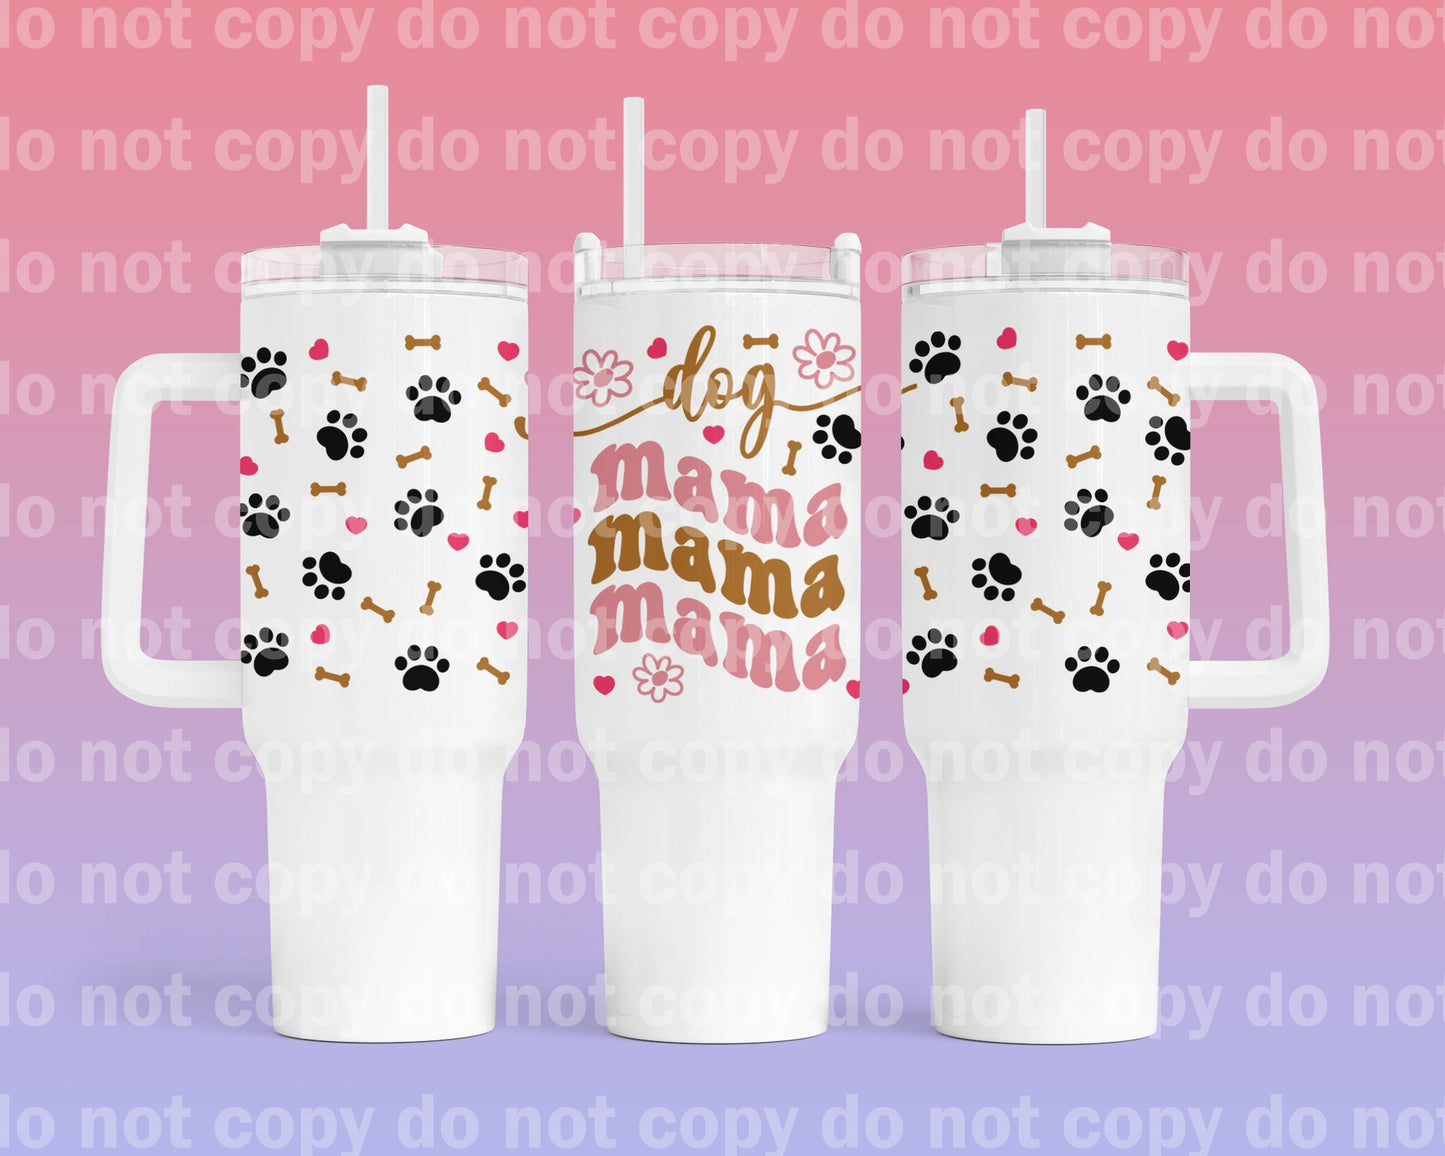 Dog Mama Cup Wrap 40oz Cup Wrap with Matching Handle Print